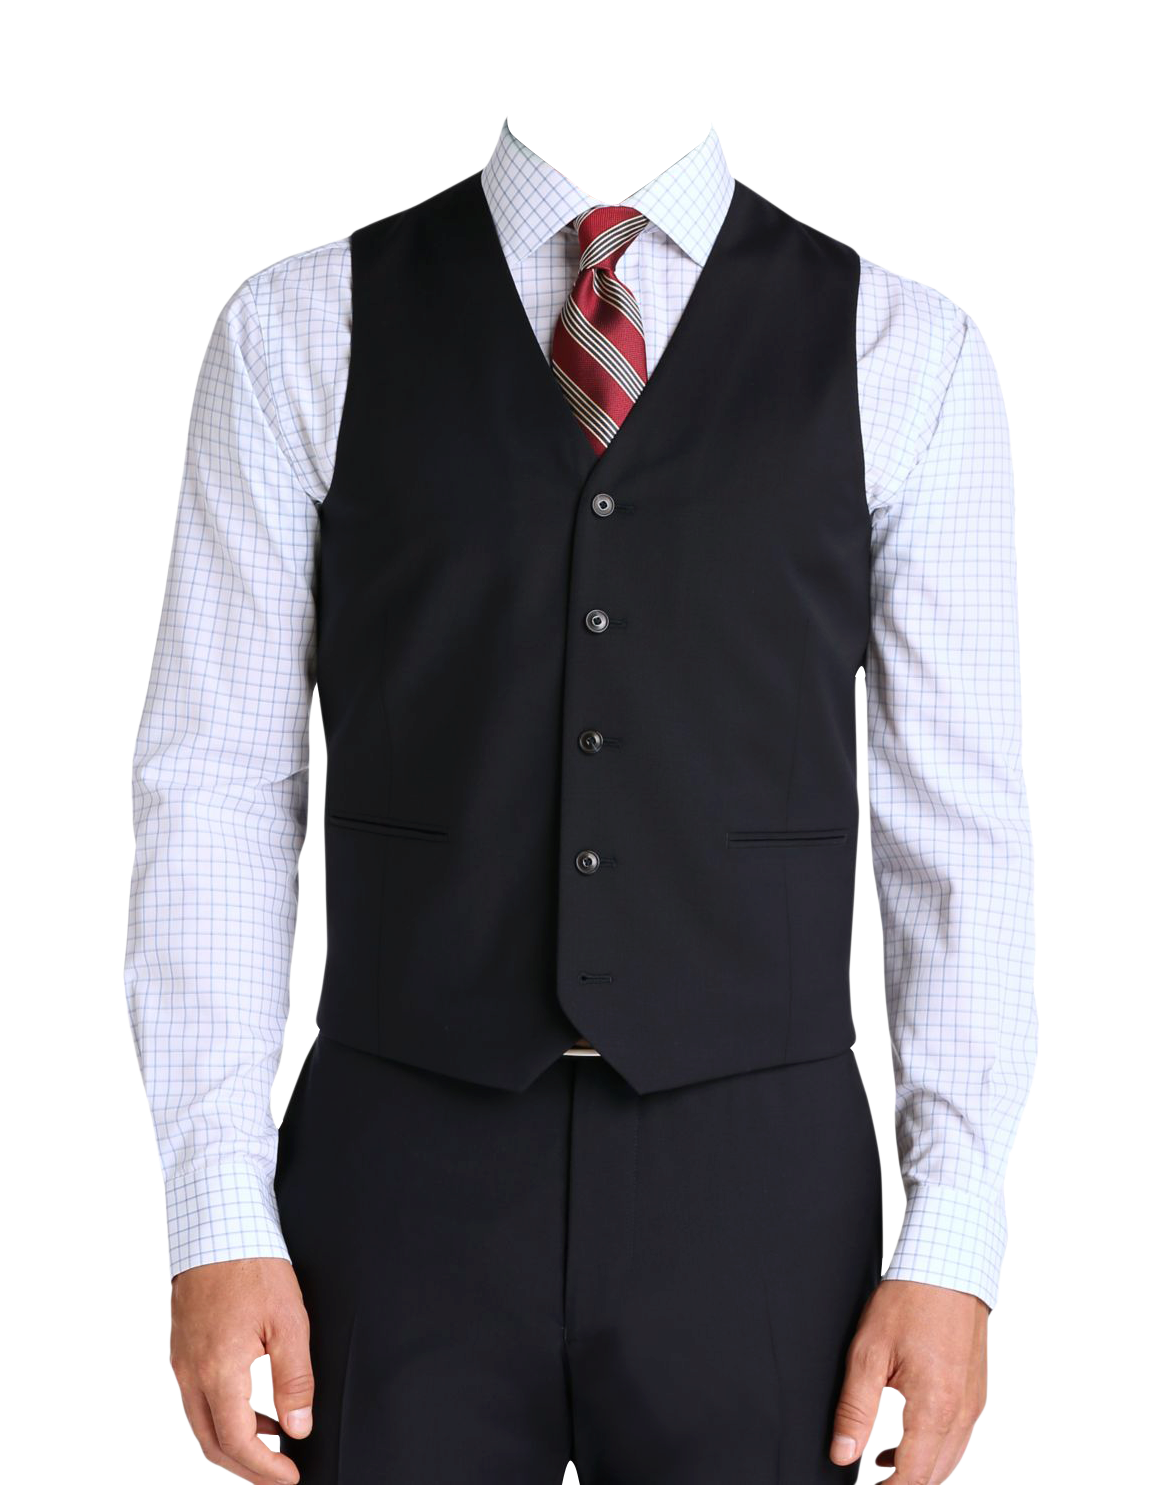 Download Men Suit Png Image For Free